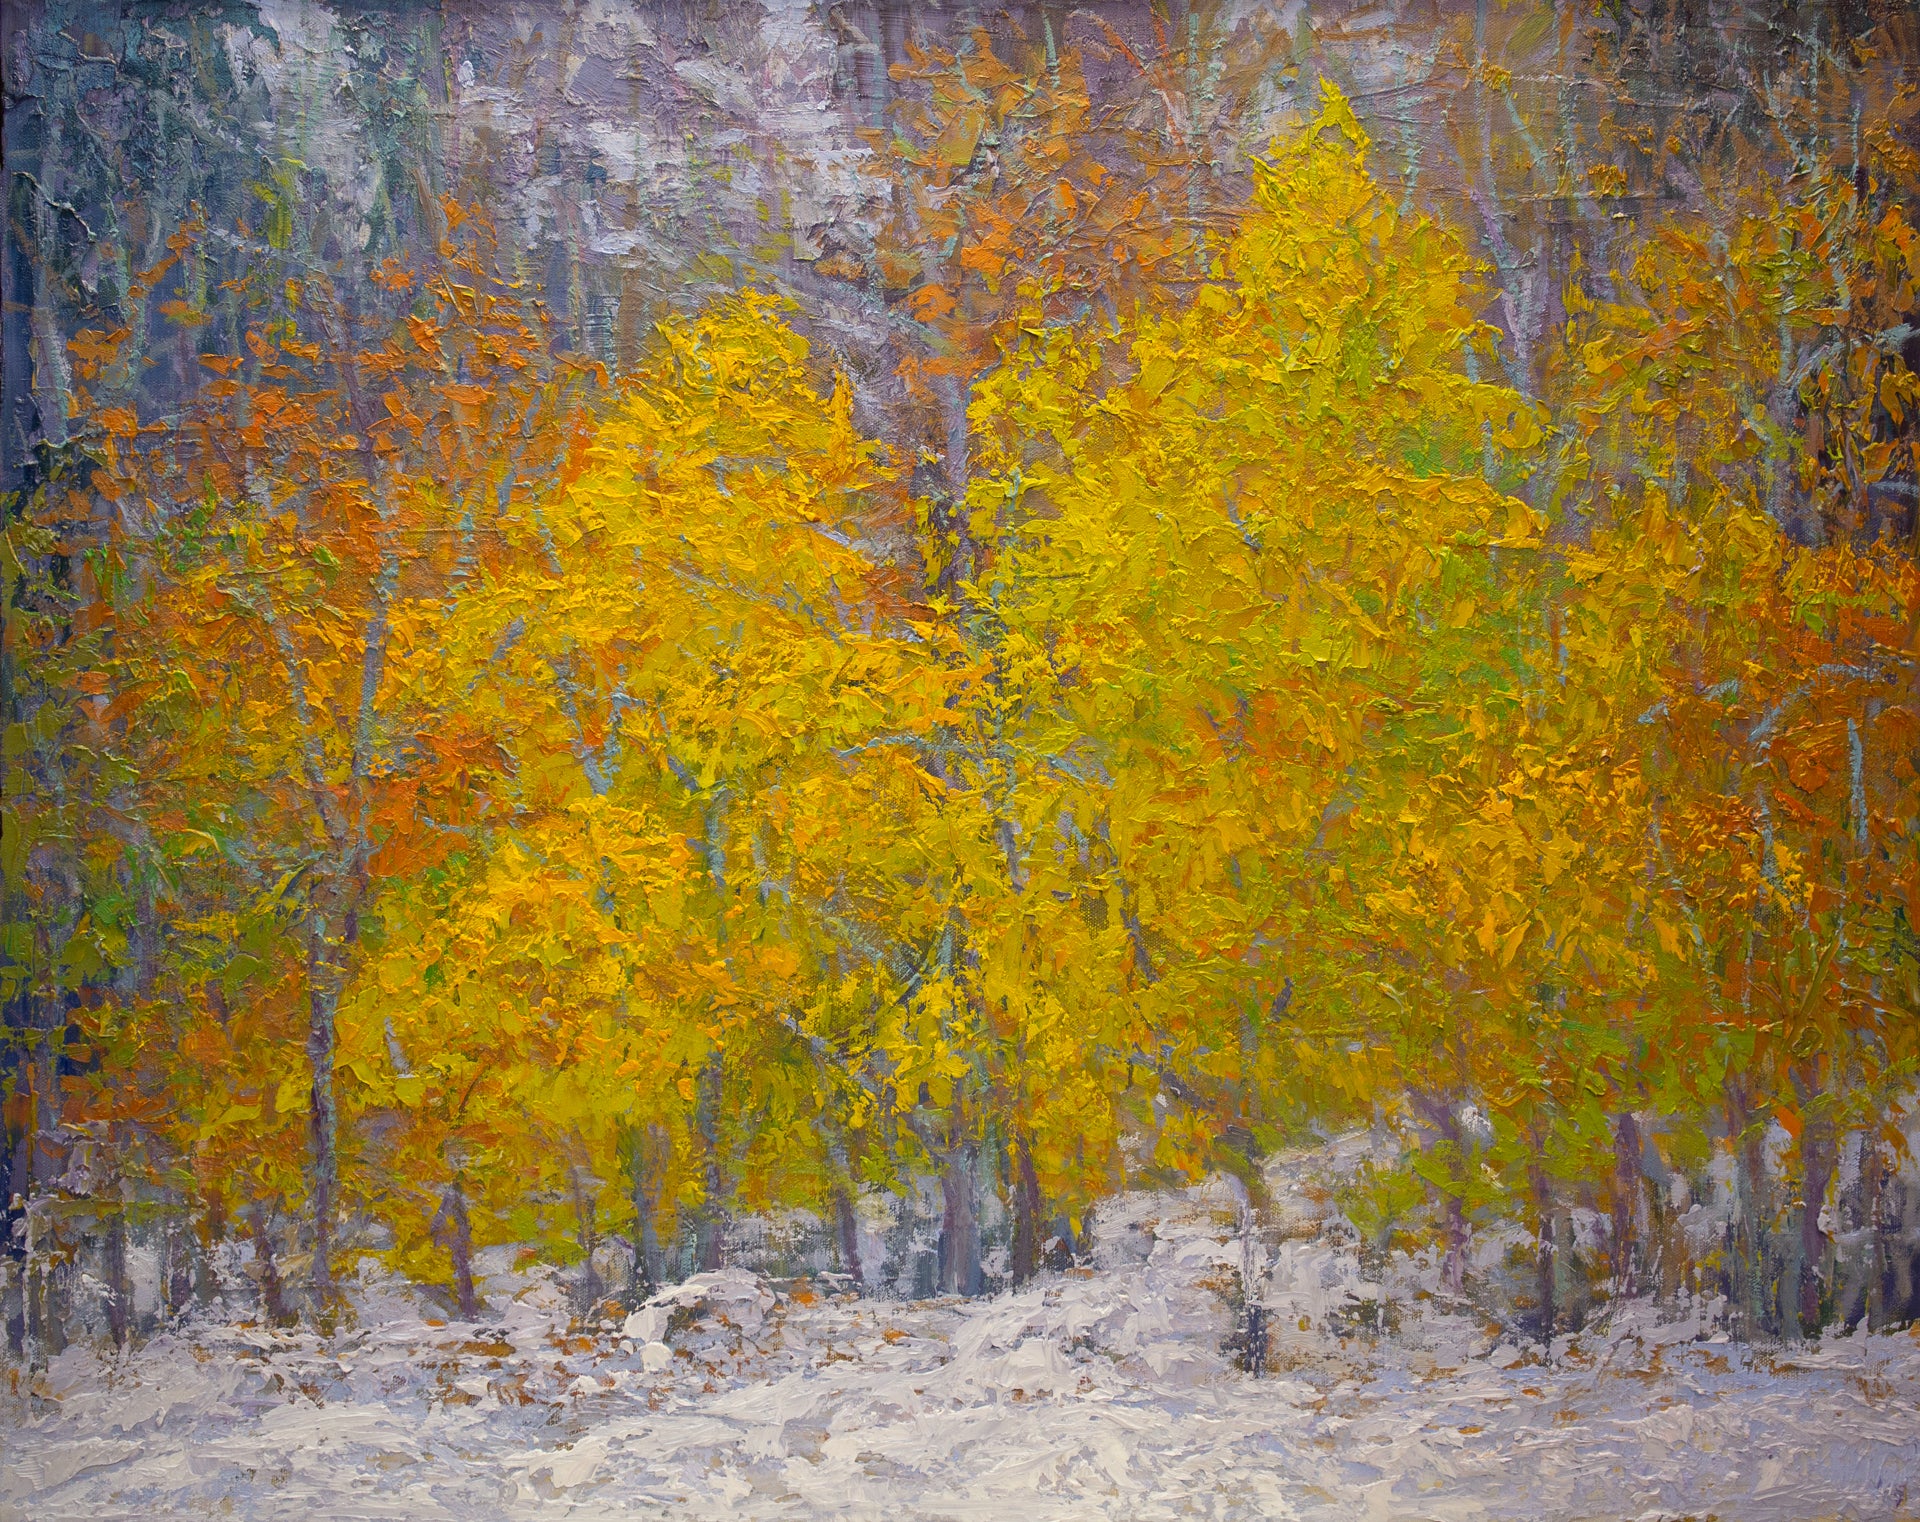 After Snow. oil on canvas 25"x31"x1.5", 2022